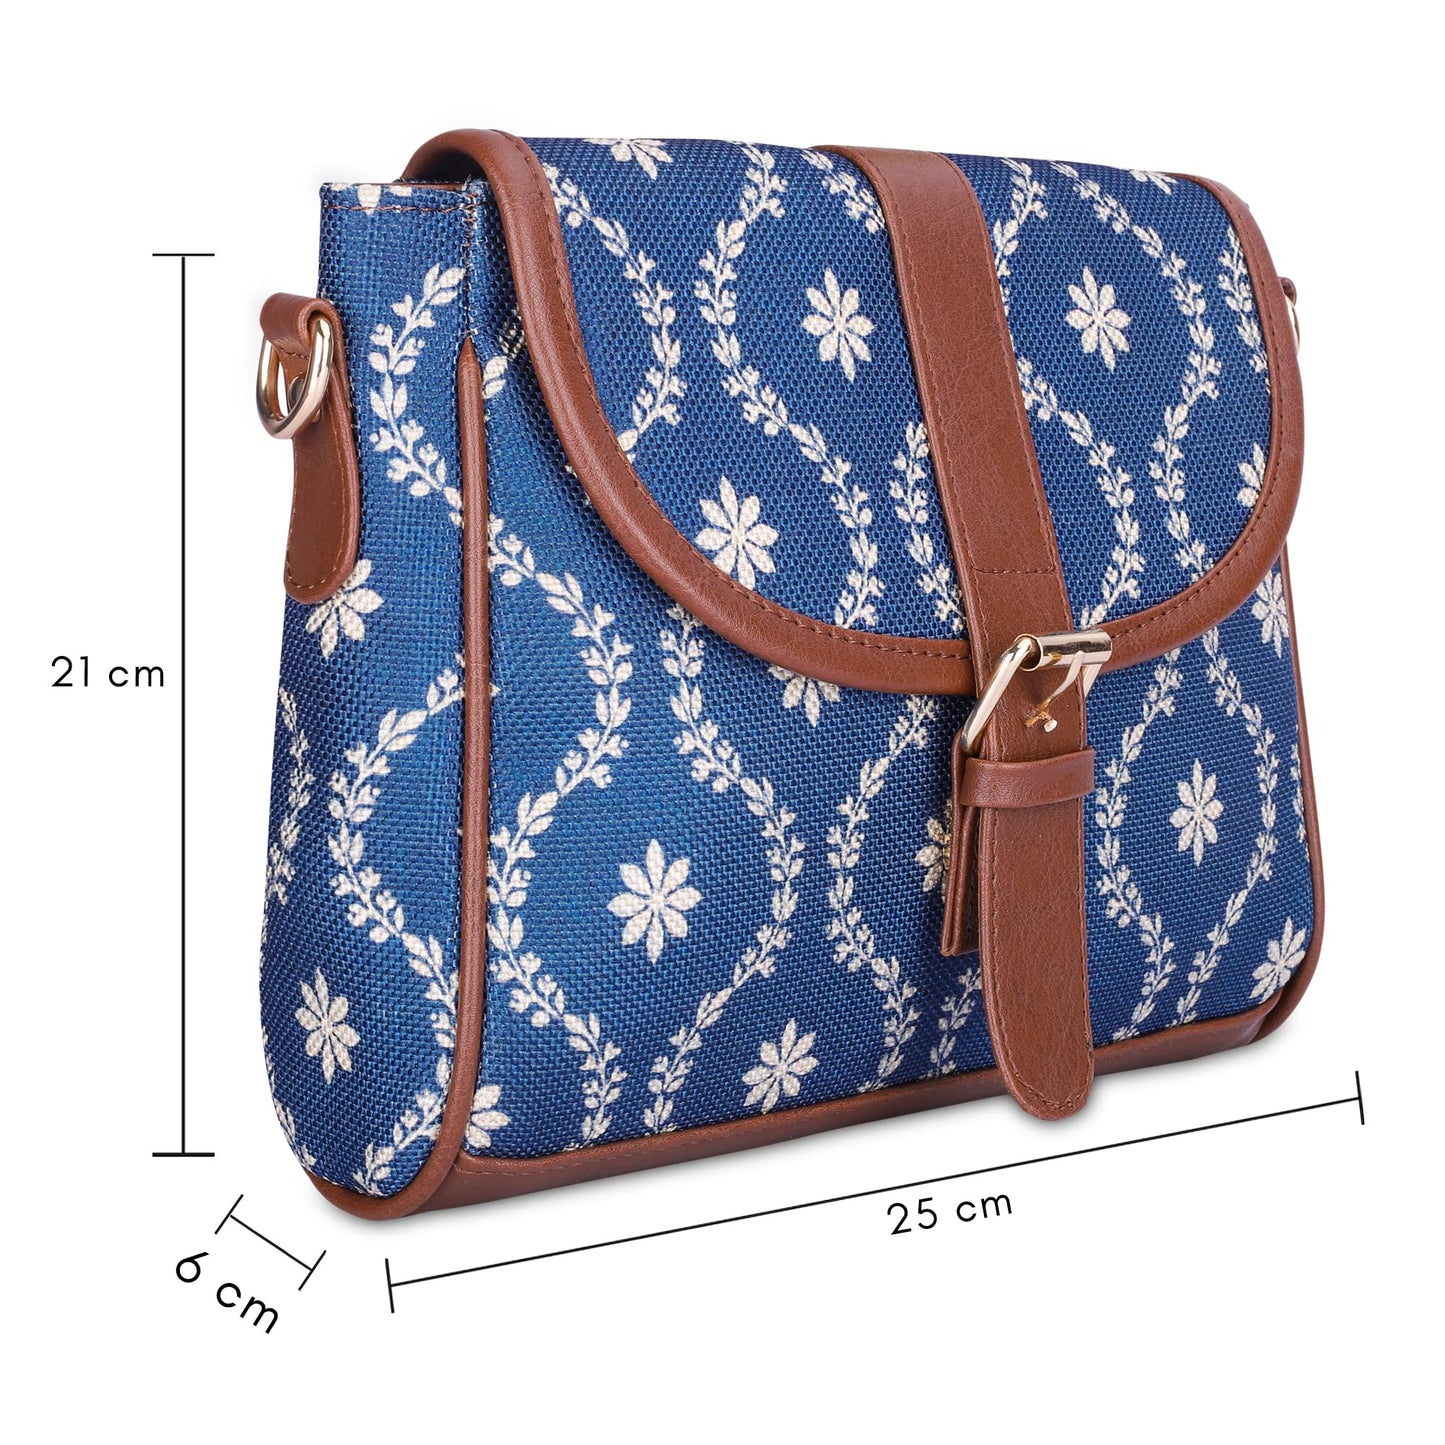 The Clownfish Madeline Printed Handicraft Fabric Handbag for Women Sling Bag Office Bag Ladies Shoulder Bag with Snap Flap Closure Tote For Women College Girls (Royal Blue)